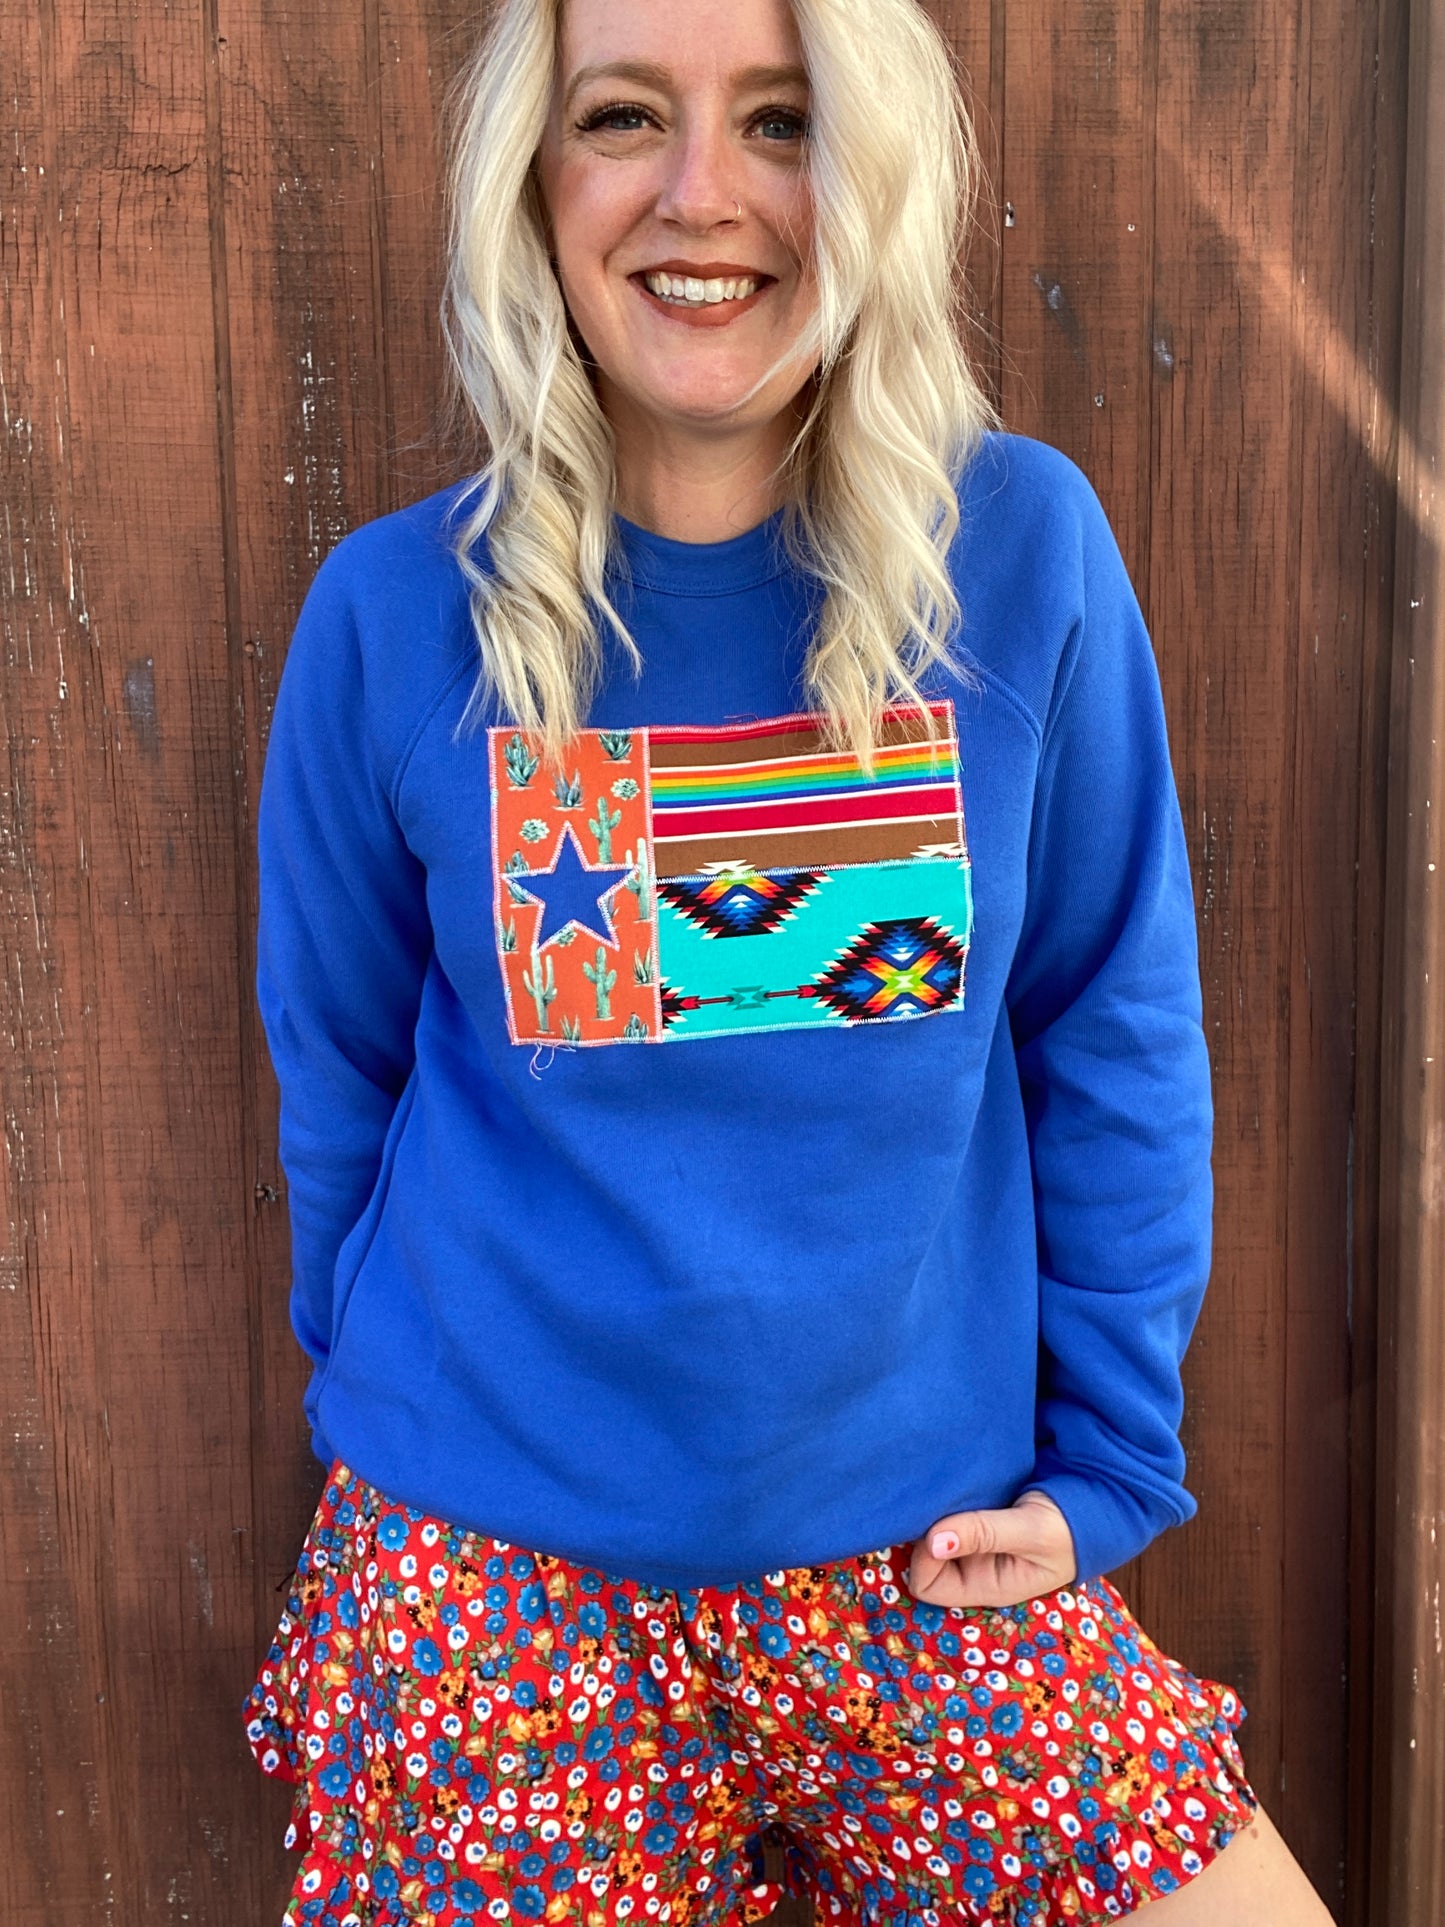 Turquoise Tribal Texas Flag Pullover [Royal Blue]